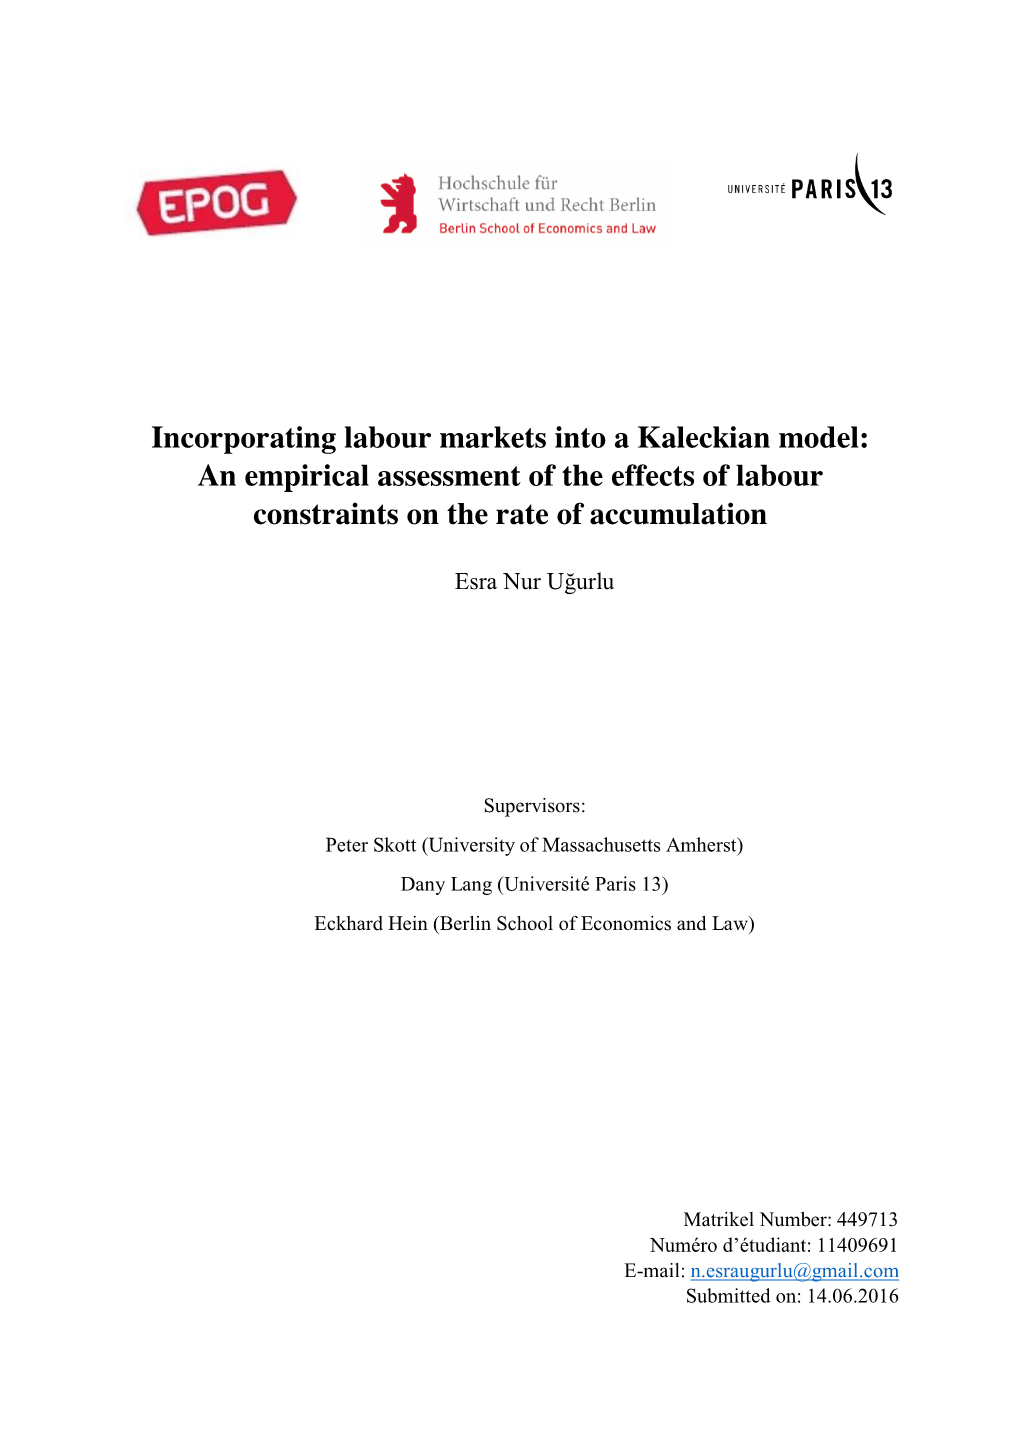 Incorporating Labour Markets Into a Kaleckian Model: an Empirical Assessment of the Effects of Labour Constraints on the Rate of Accumulation